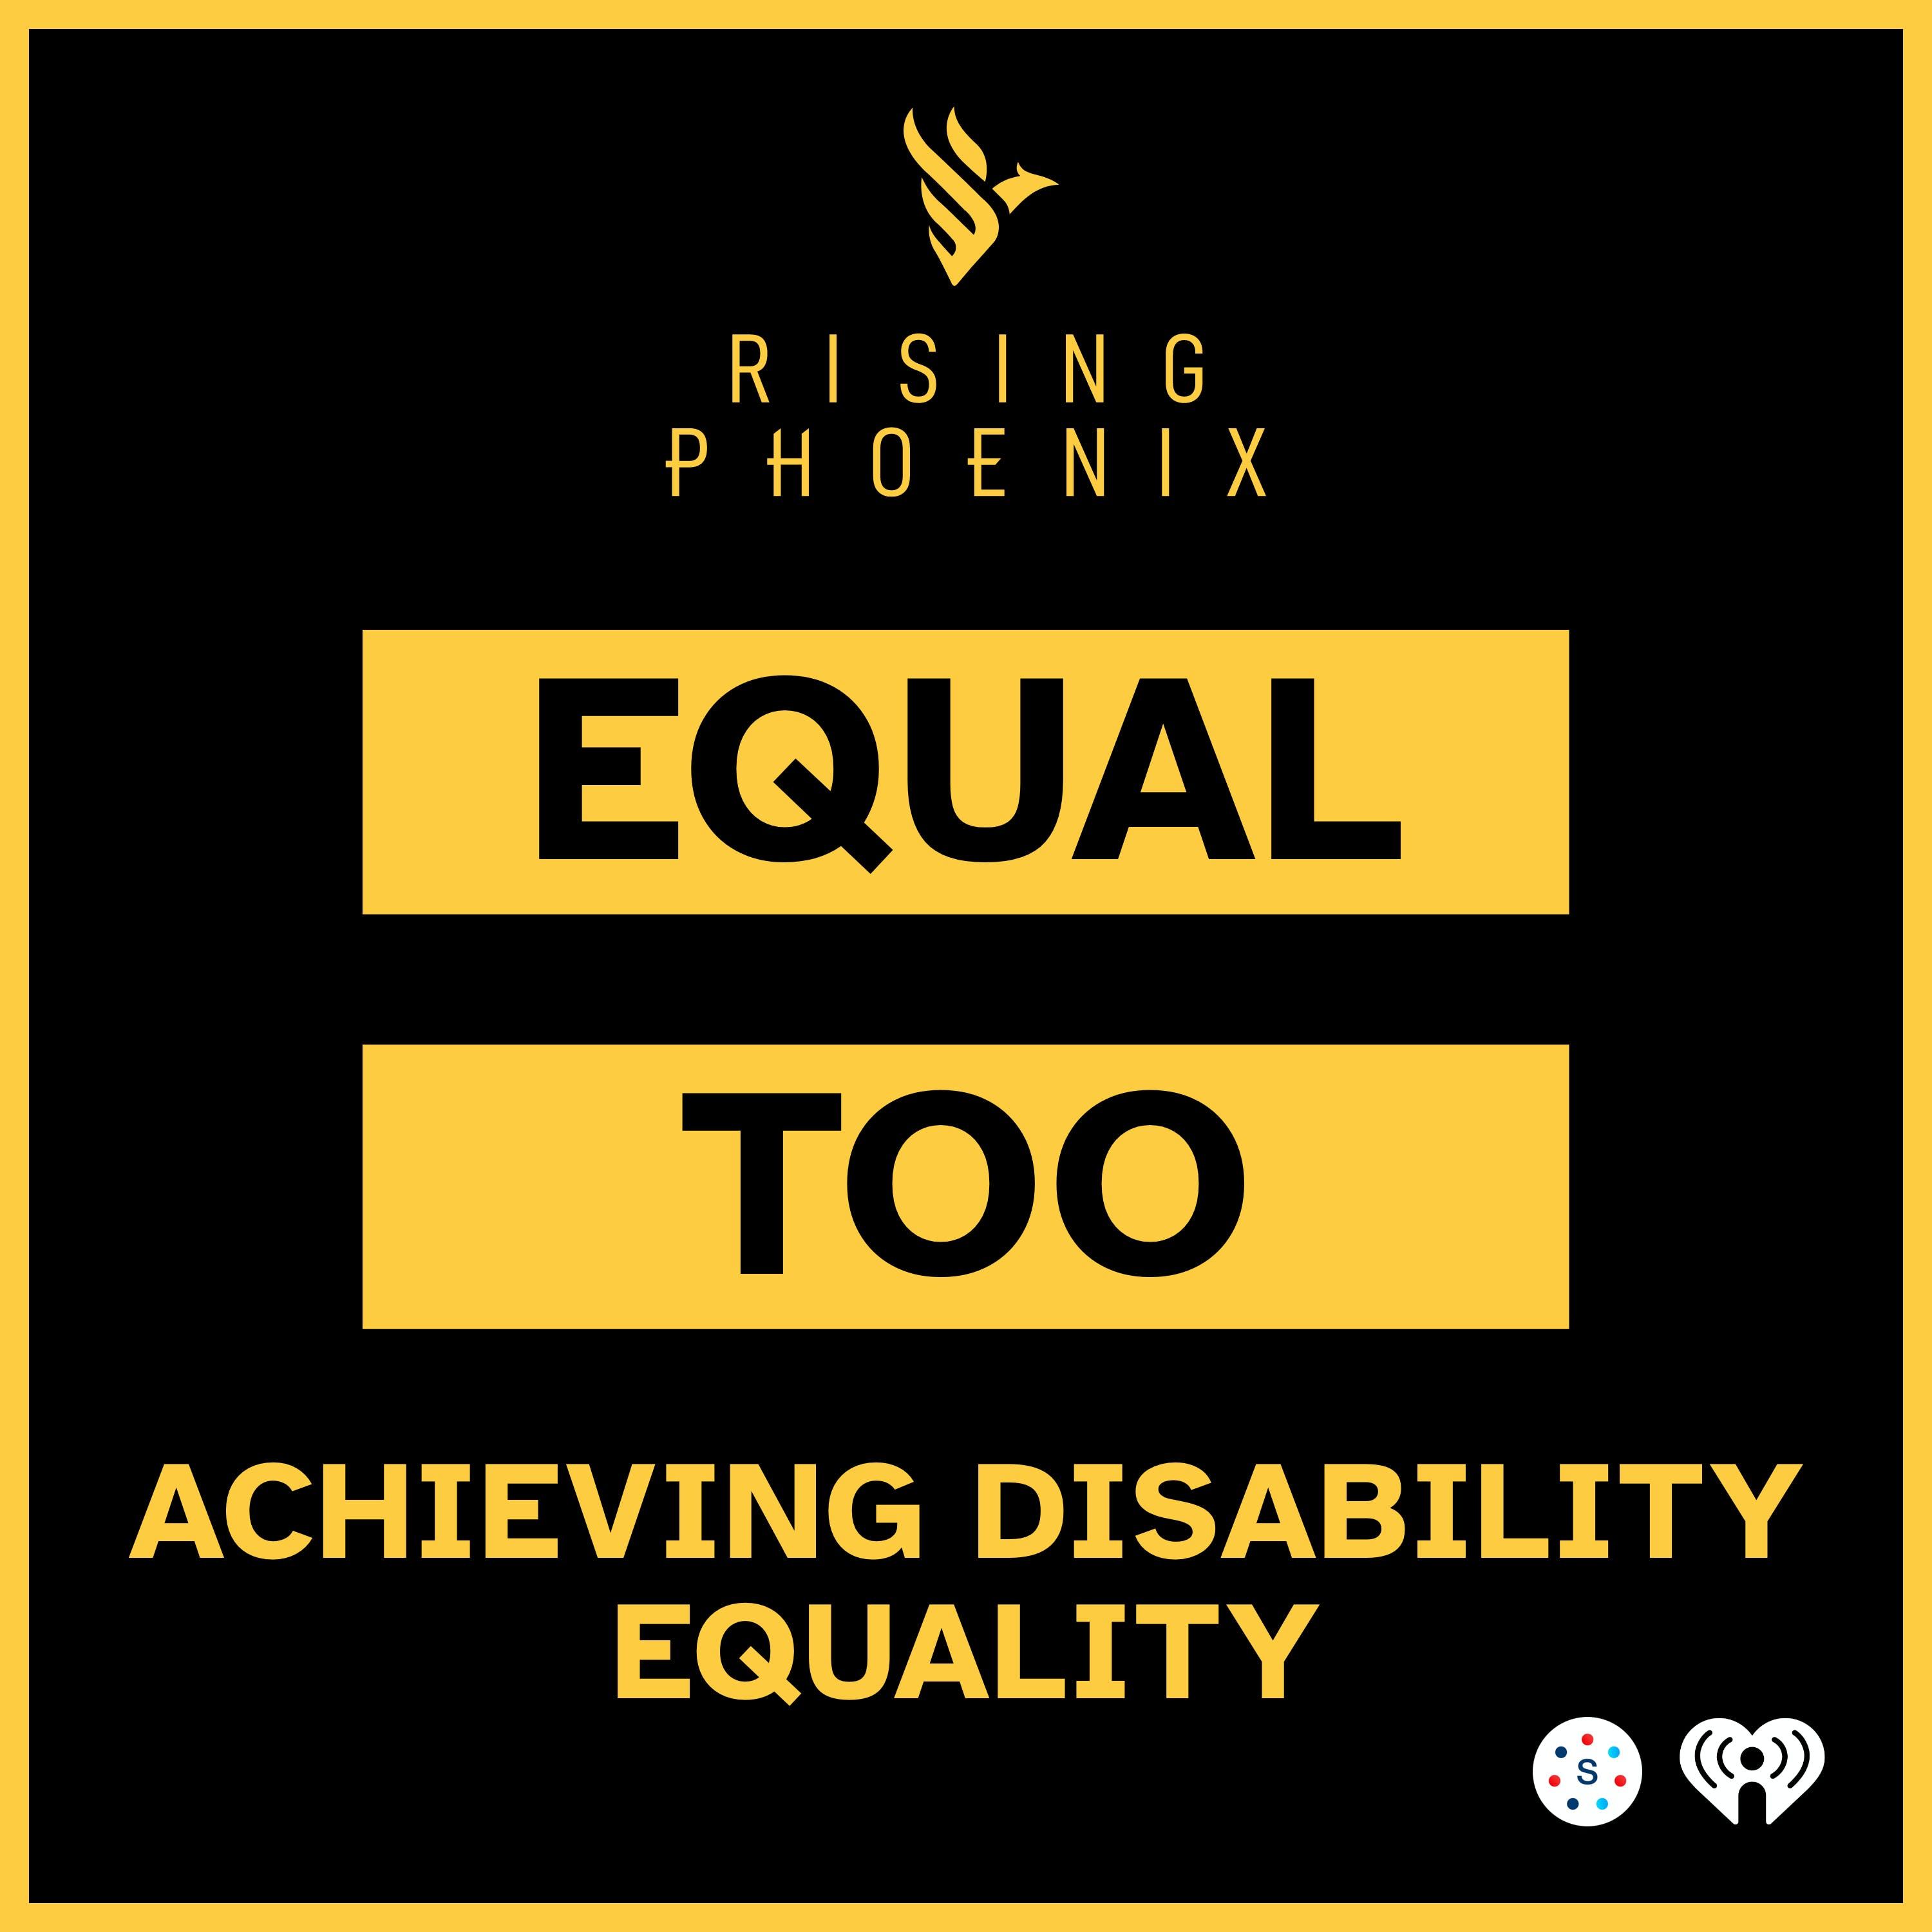 Introducing - Equal Too: Achieving Disability Equality